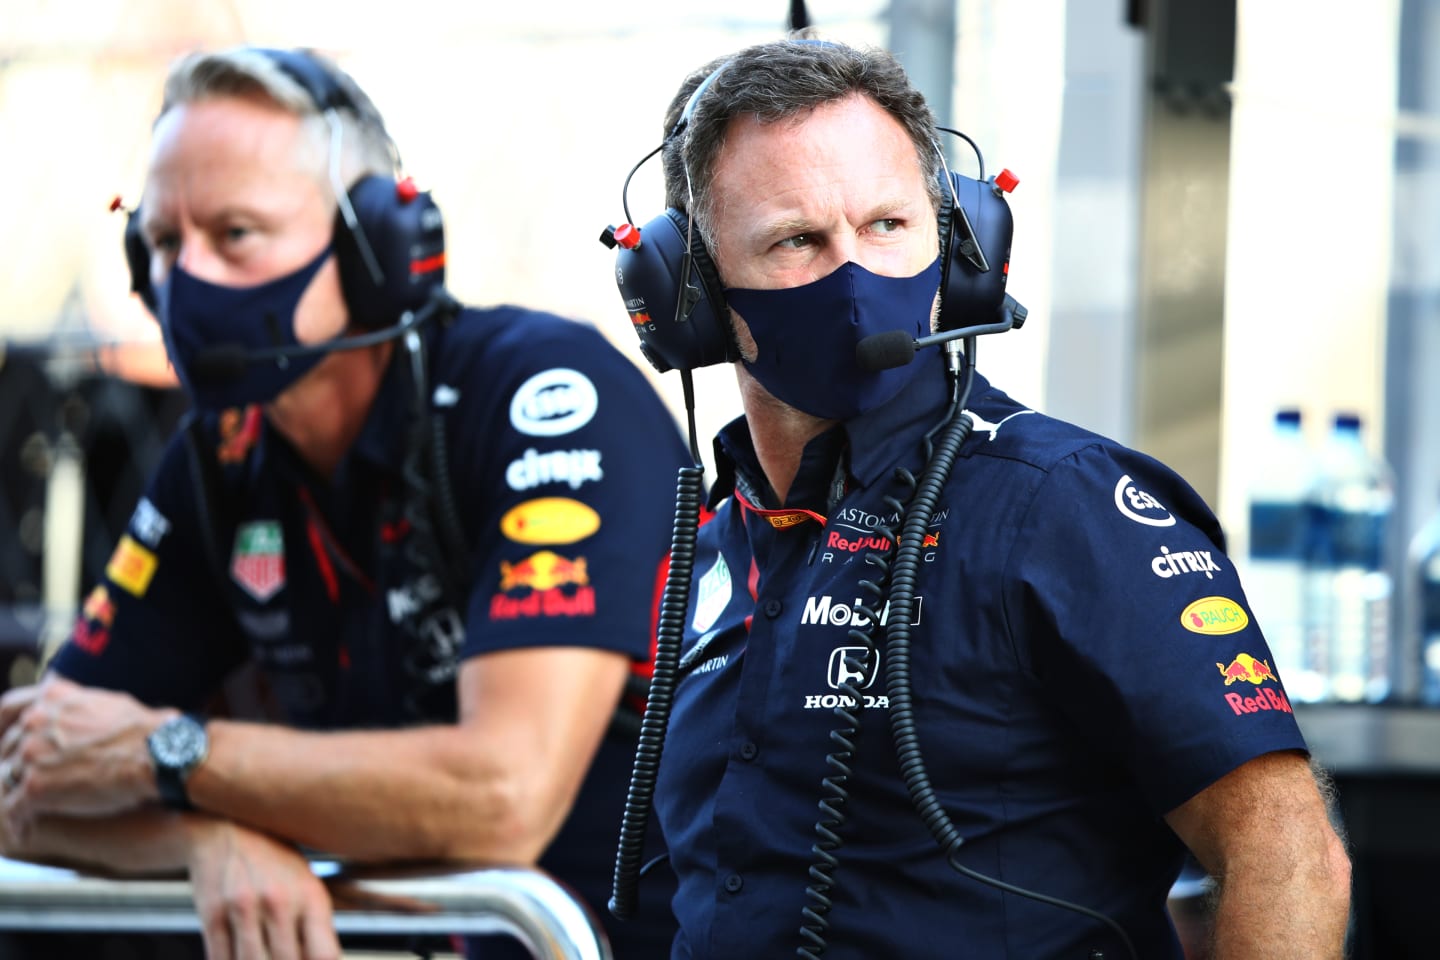 SOCHI, RUSSIA - SEPTEMBER 25: Red Bull Racing Team Principal Christian Horner and Red Bull Racing Team Manager Jonathan Wheatley looks on from the pitwall during practice ahead of the F1 Grand Prix of Russia at Sochi Autodrom on September 25, 2020 in Sochi, Russia. (Photo by Mark Thompson/Getty Images)